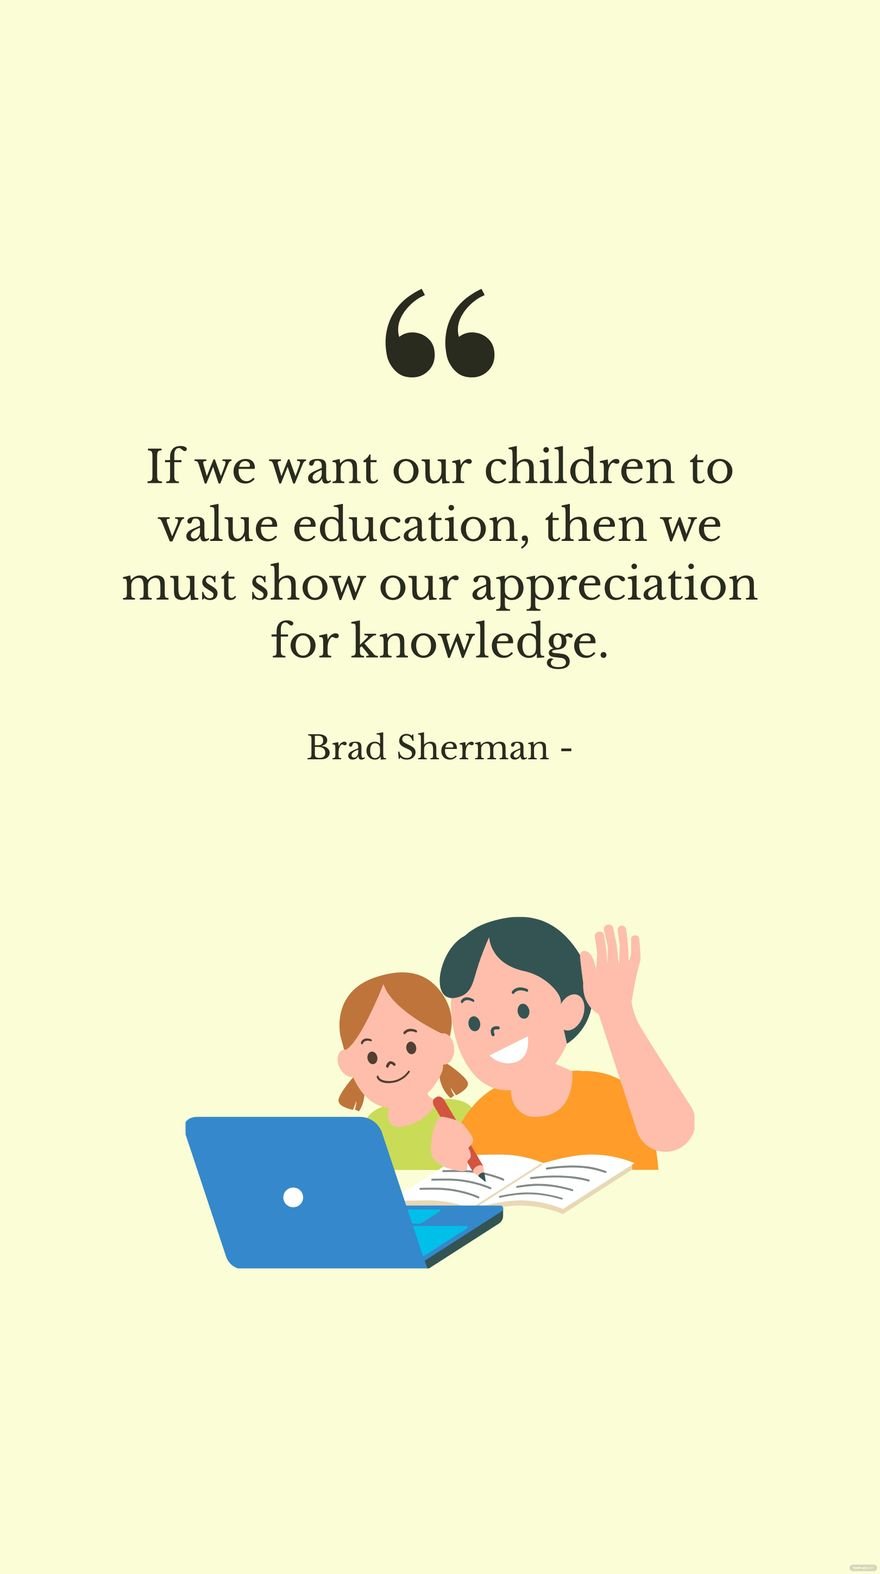 Free Brad Sherman - If we want our children to value education, then we must show our appreciation for knowledge. in JPG